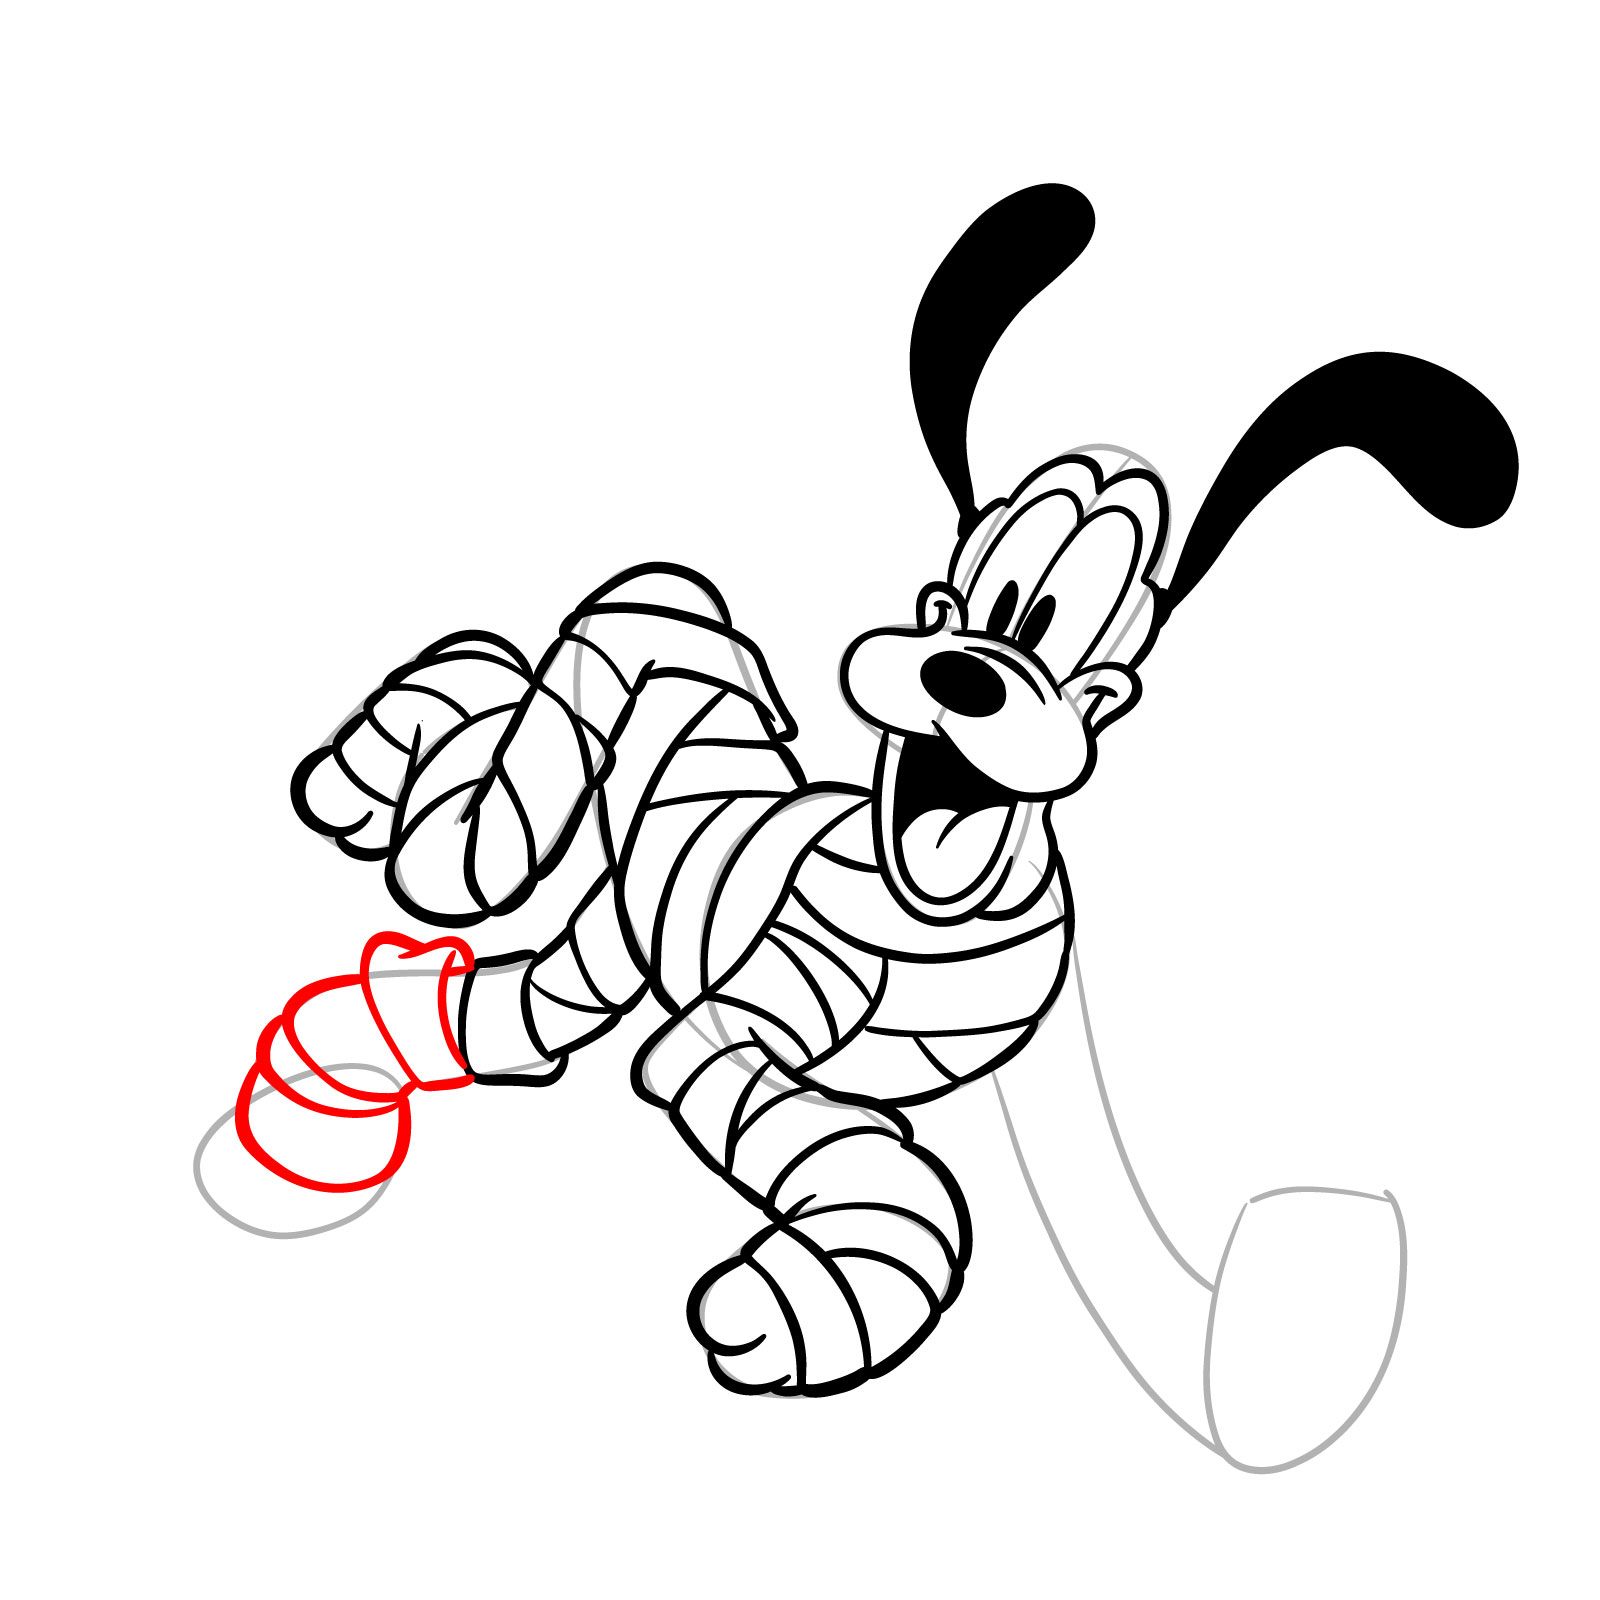 How to draw Halloween Pluto as a mummy - step 22